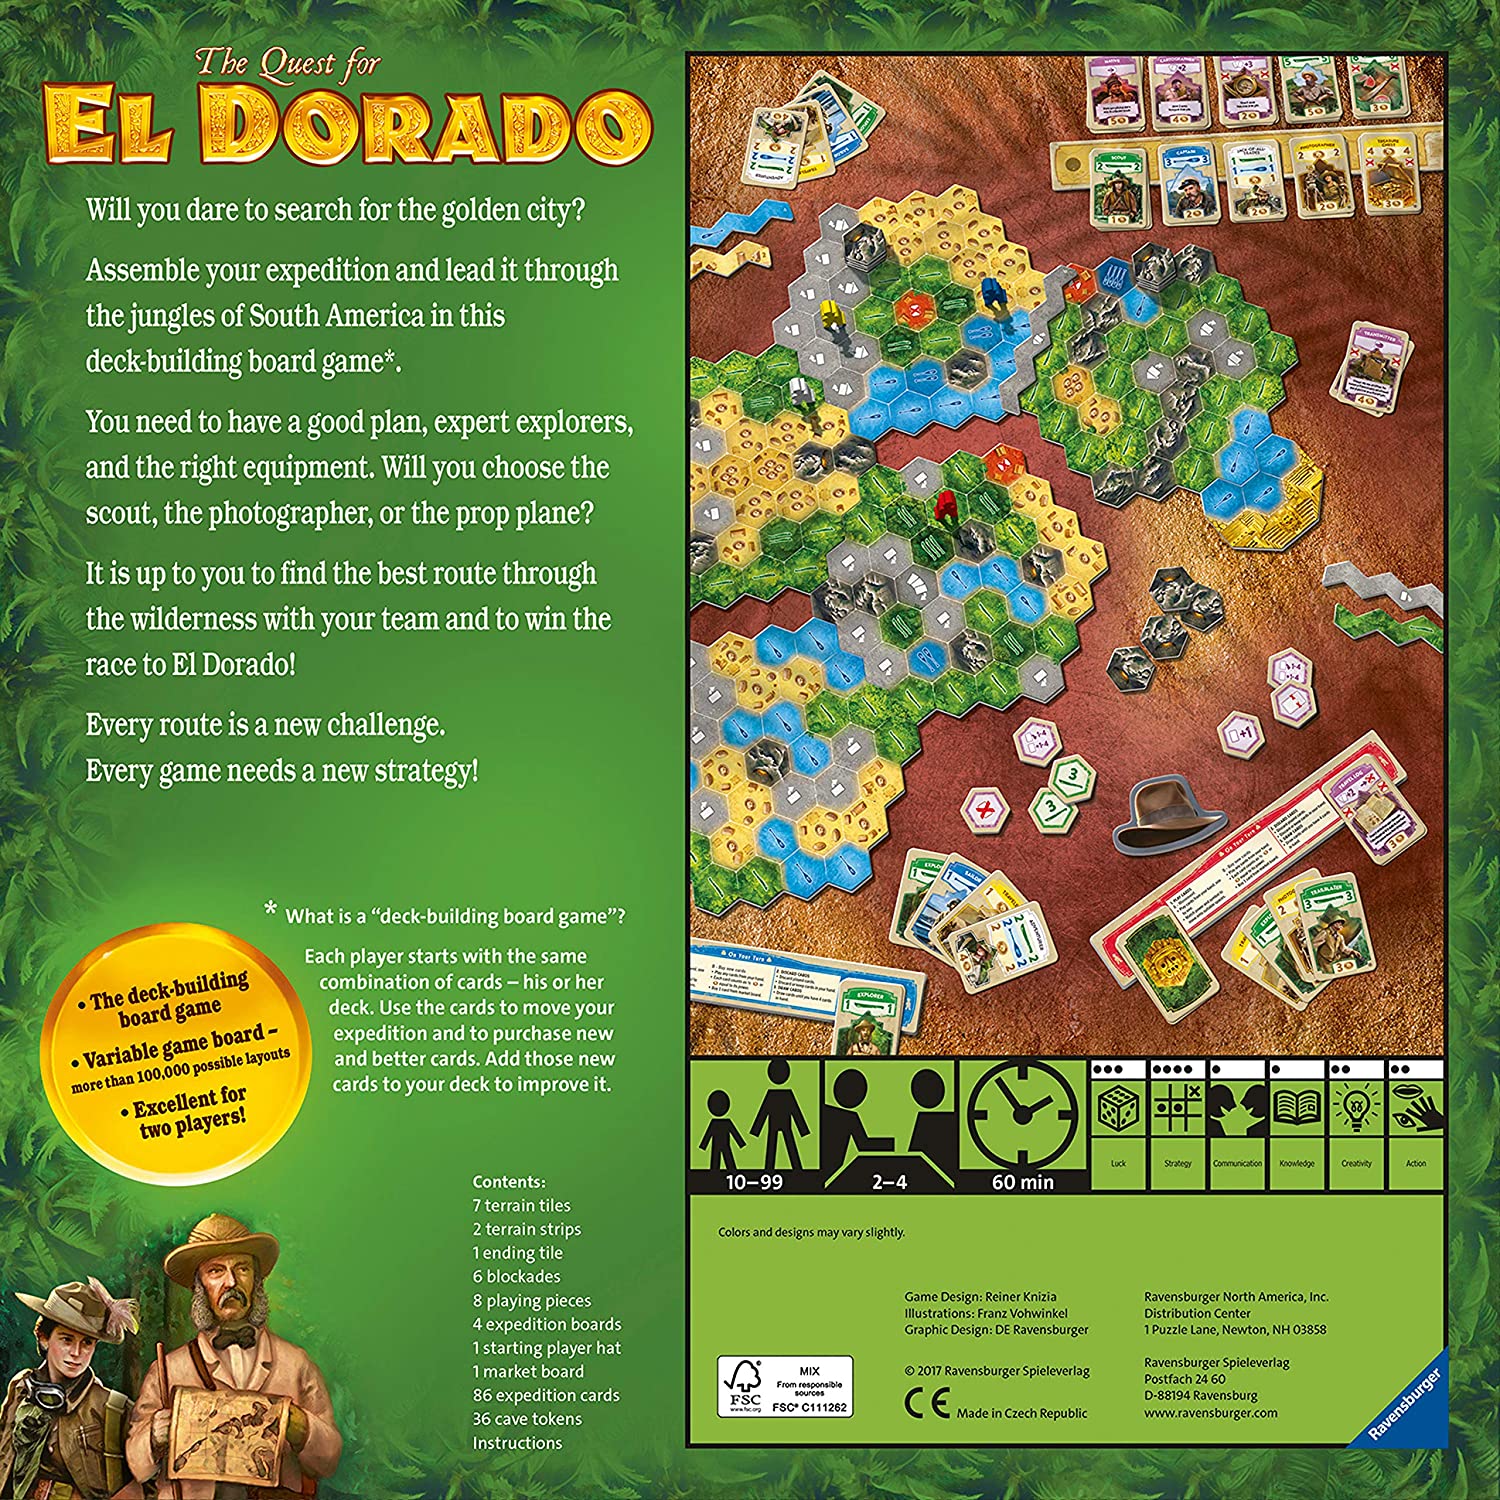 Find out about The Quest for El Dorado